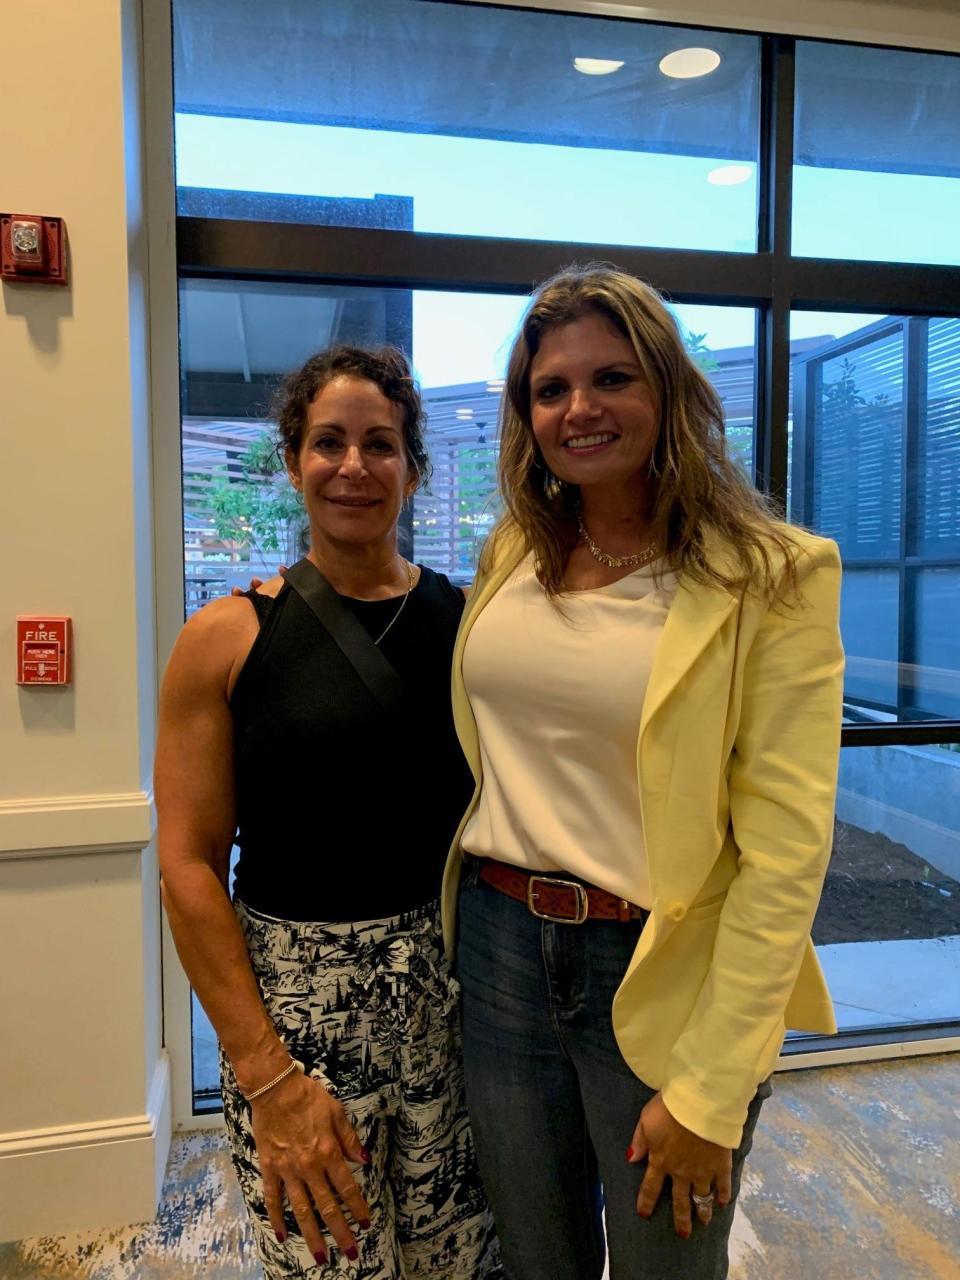 Sally Cianciolo (left), foundry sales manager for Heraeus Electro-Nite, is respected in the metal field for being an extremely successful woman in a male-dominated field. Cianciolo is shown with her co-worker, Jenni Theim-Roberson, inside sales manager.